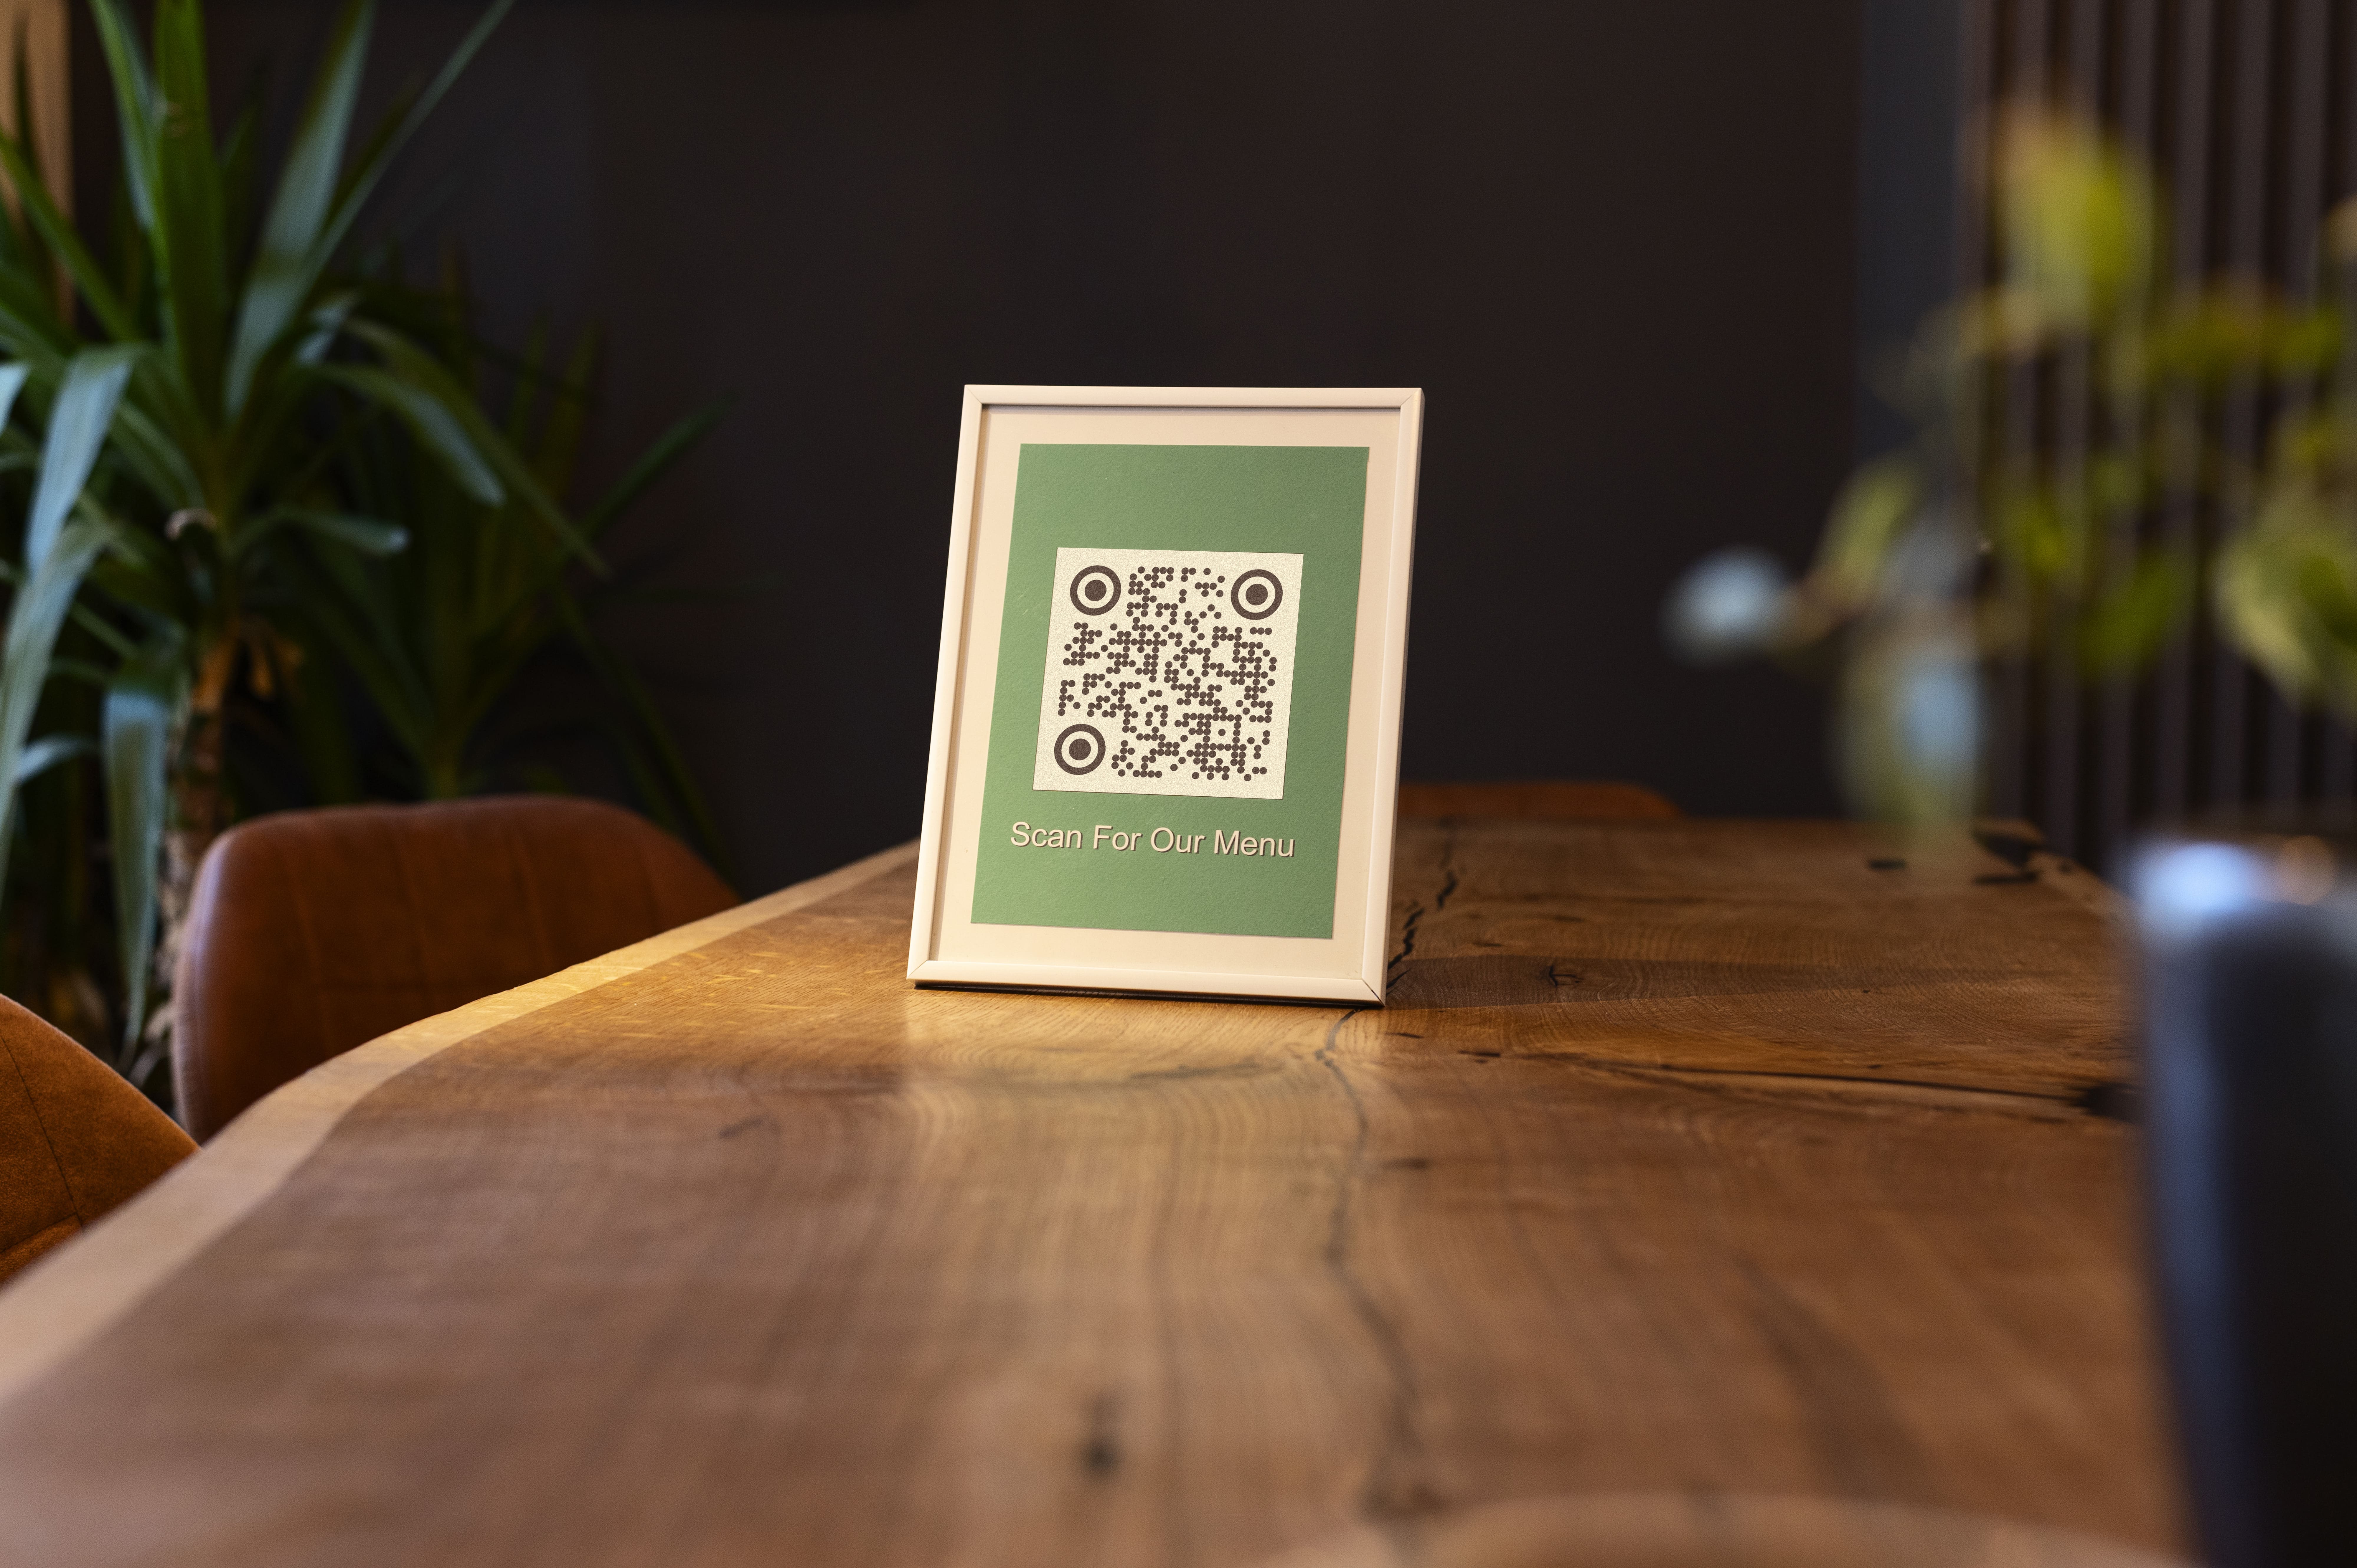 Enhancing Restaurant Services with QR Codes